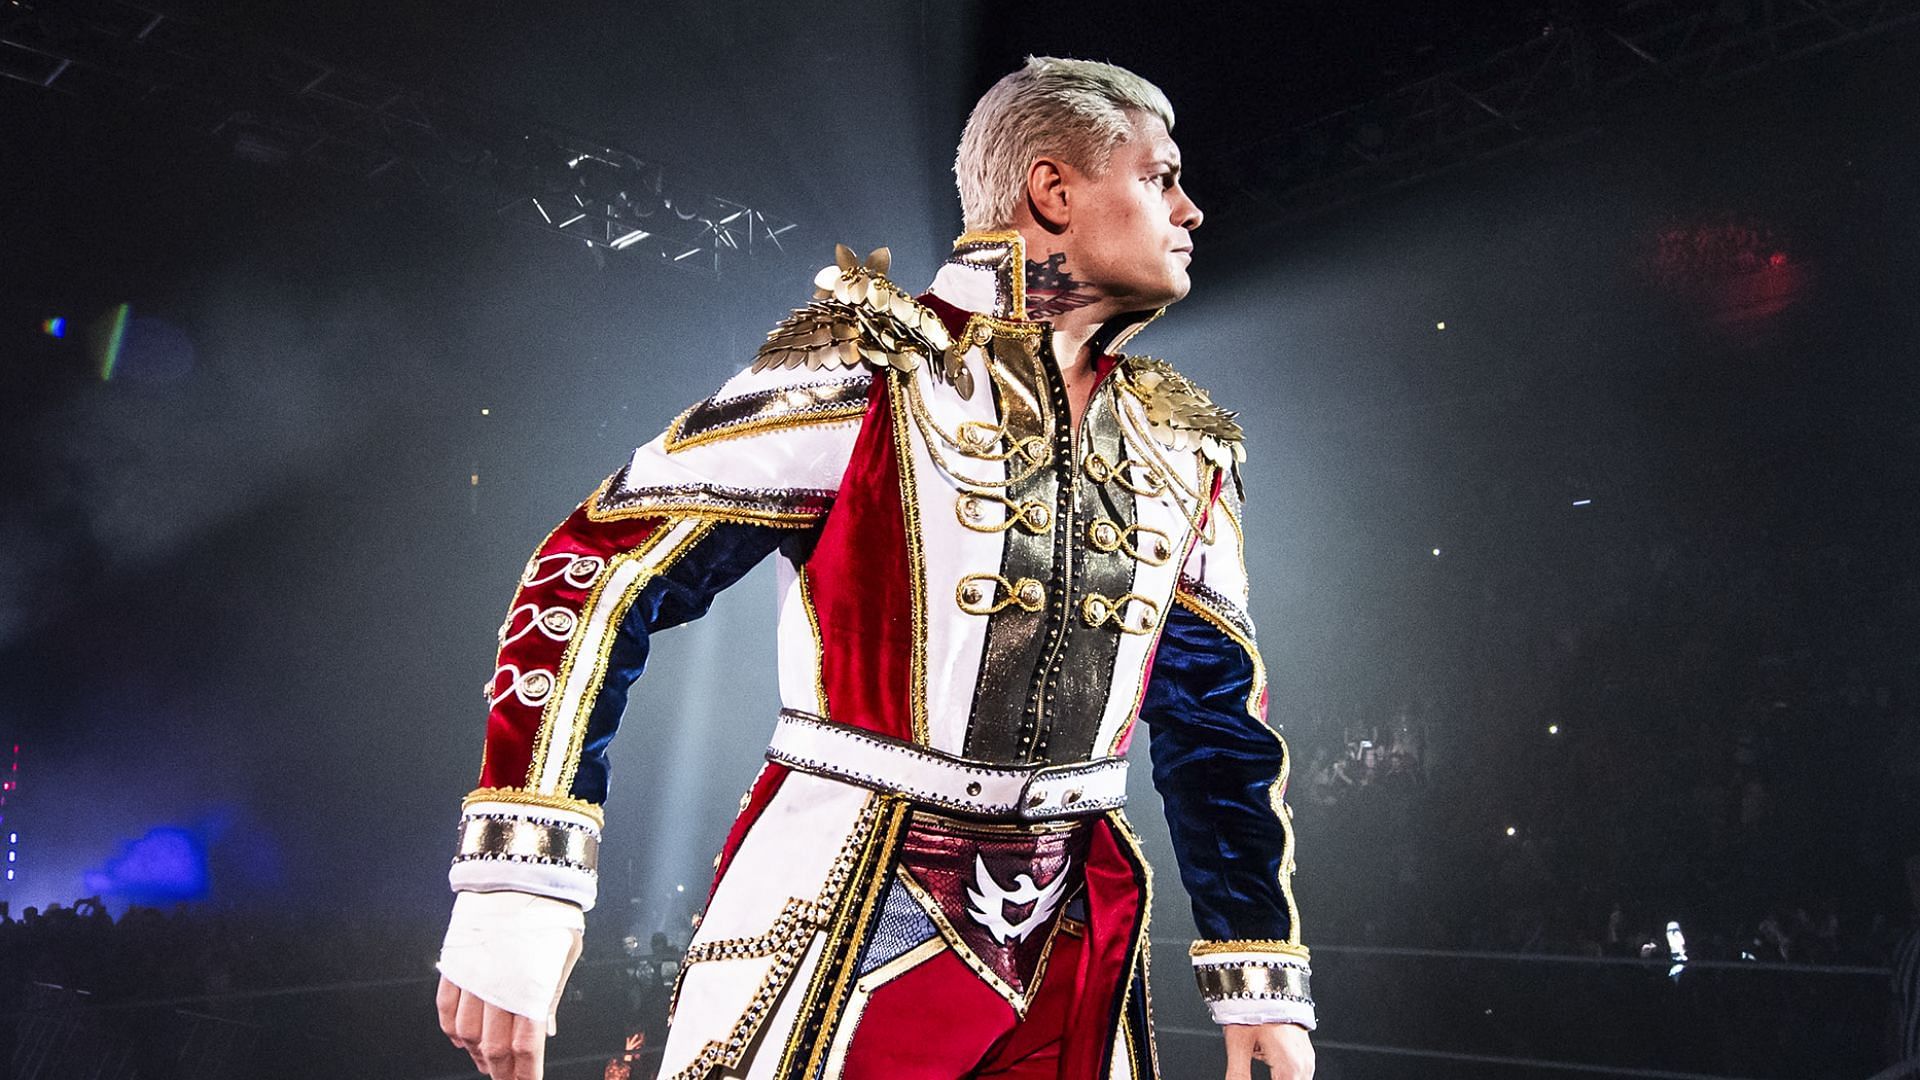 Cody Rhodes in picture.